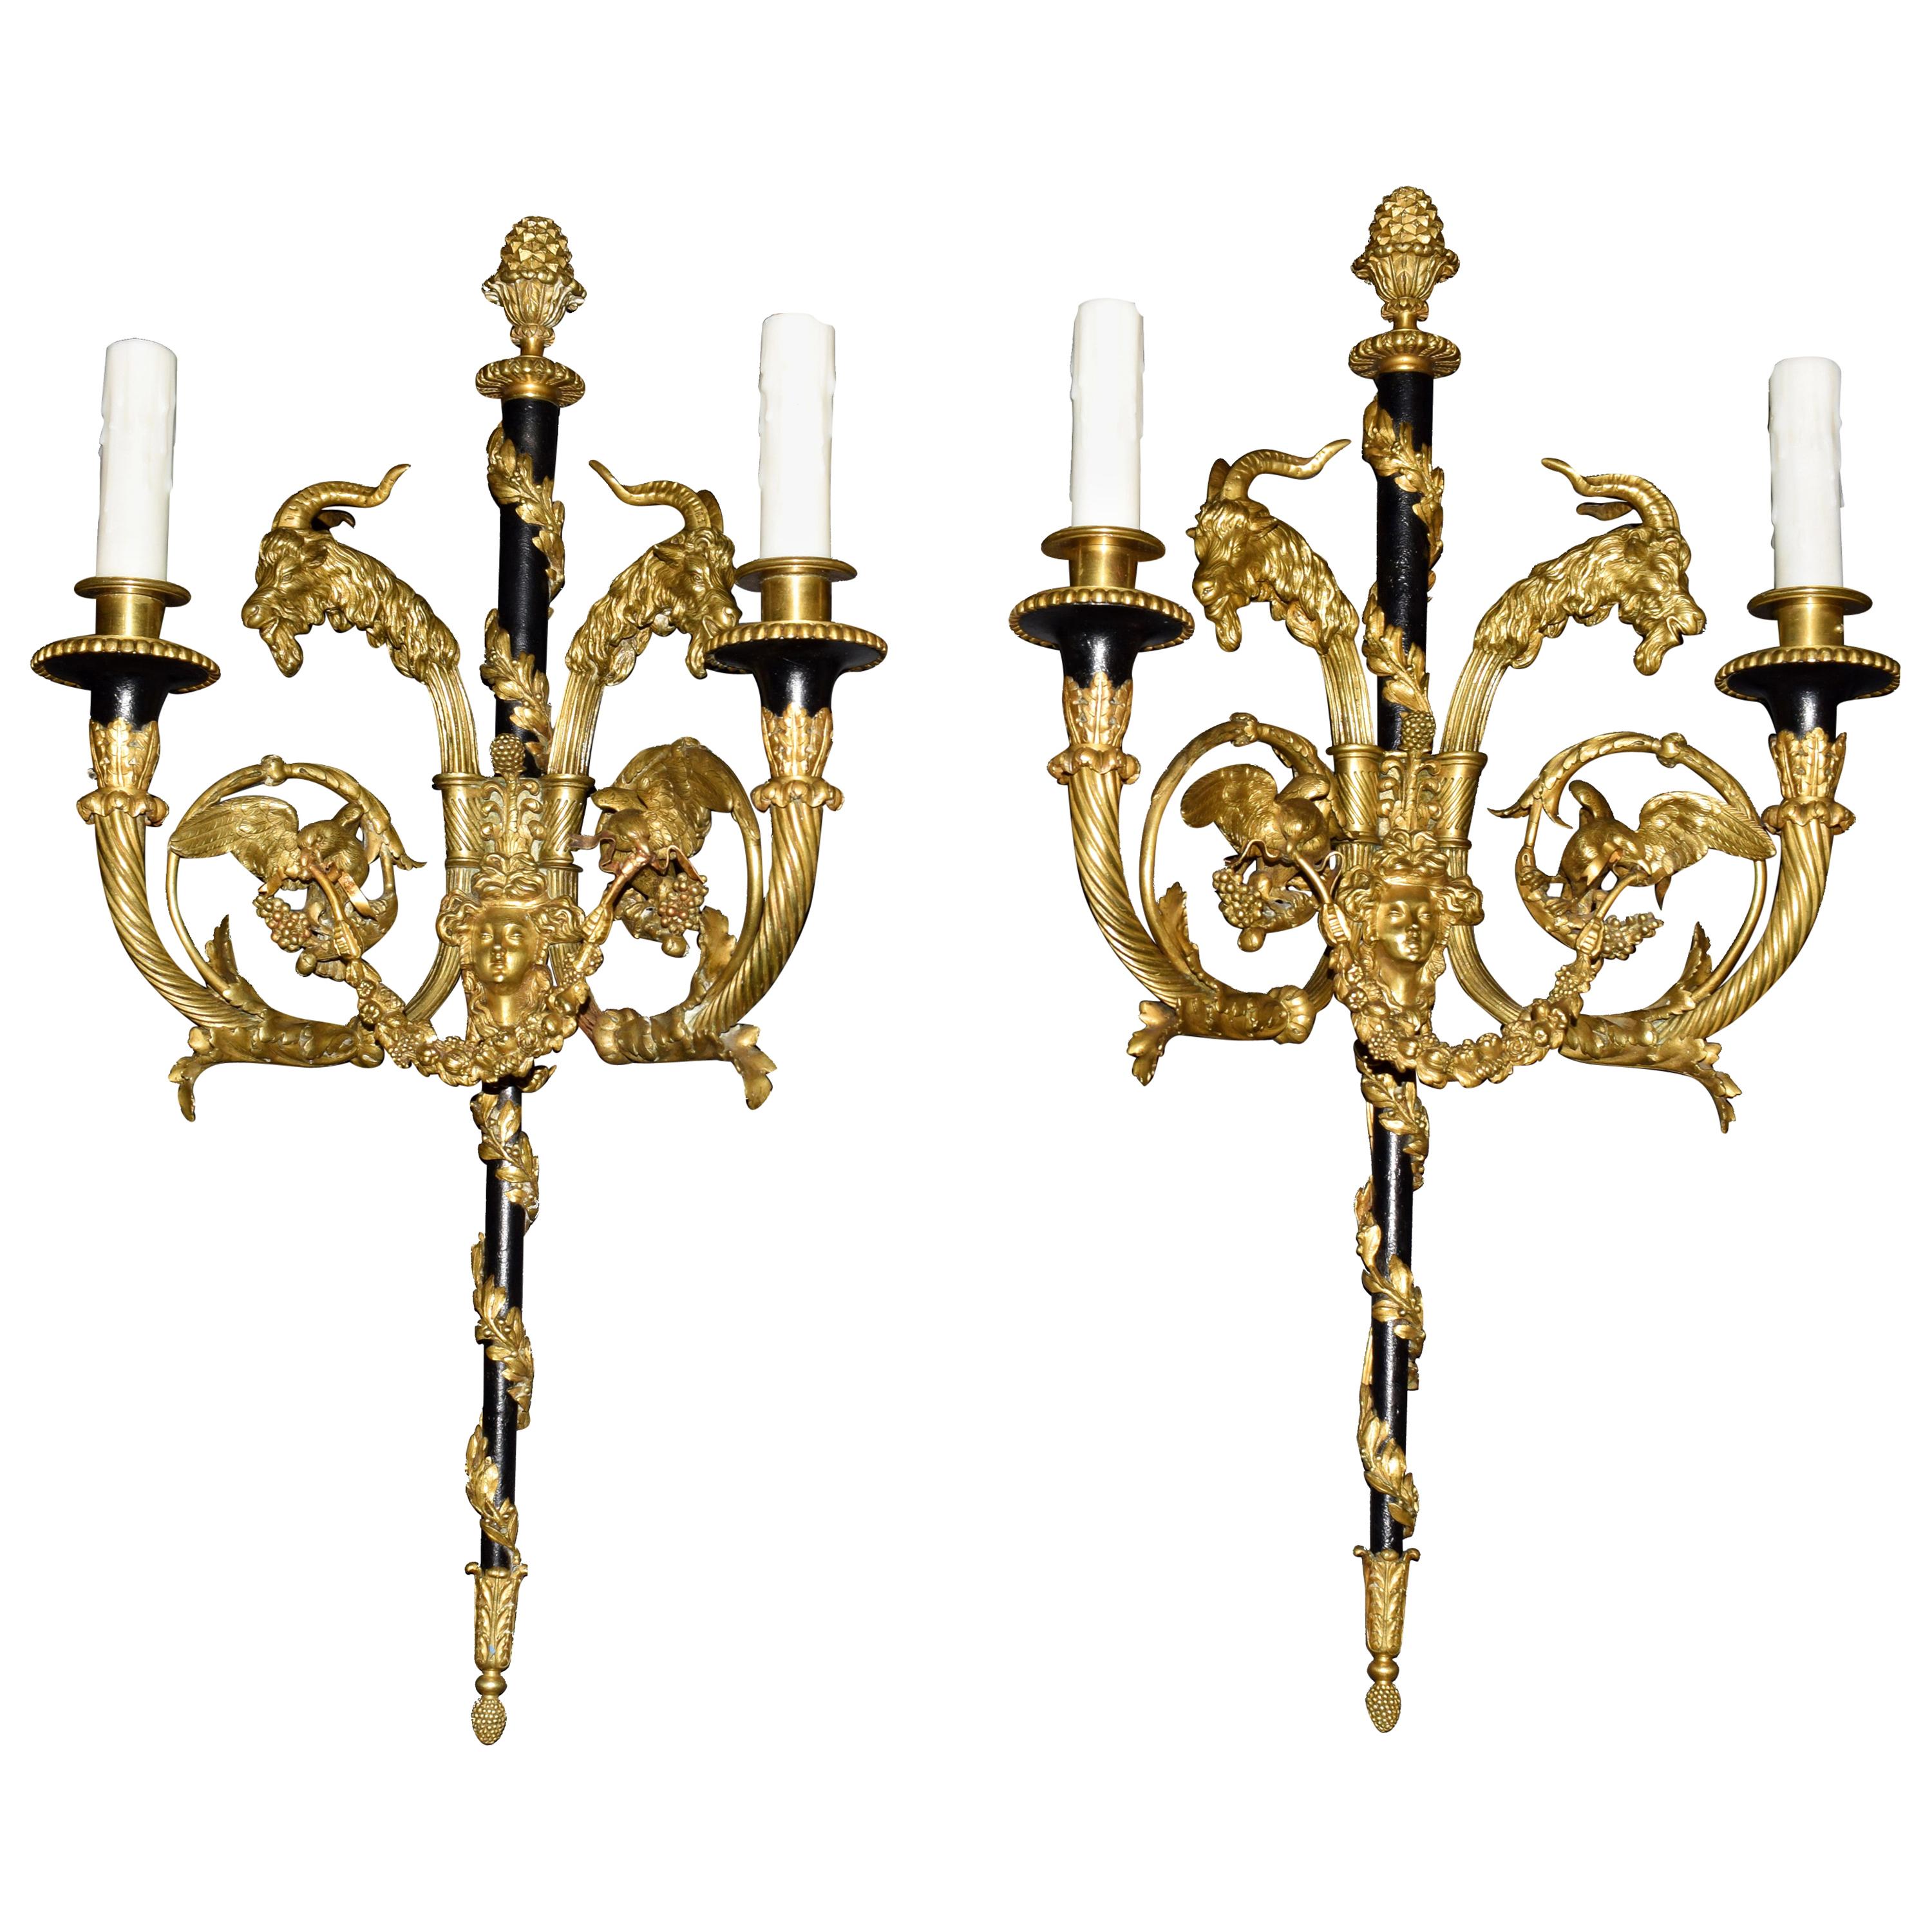 Pair of French Gilt and Enameled Bronze Two-Light Sconces signed Millet a Paris For Sale